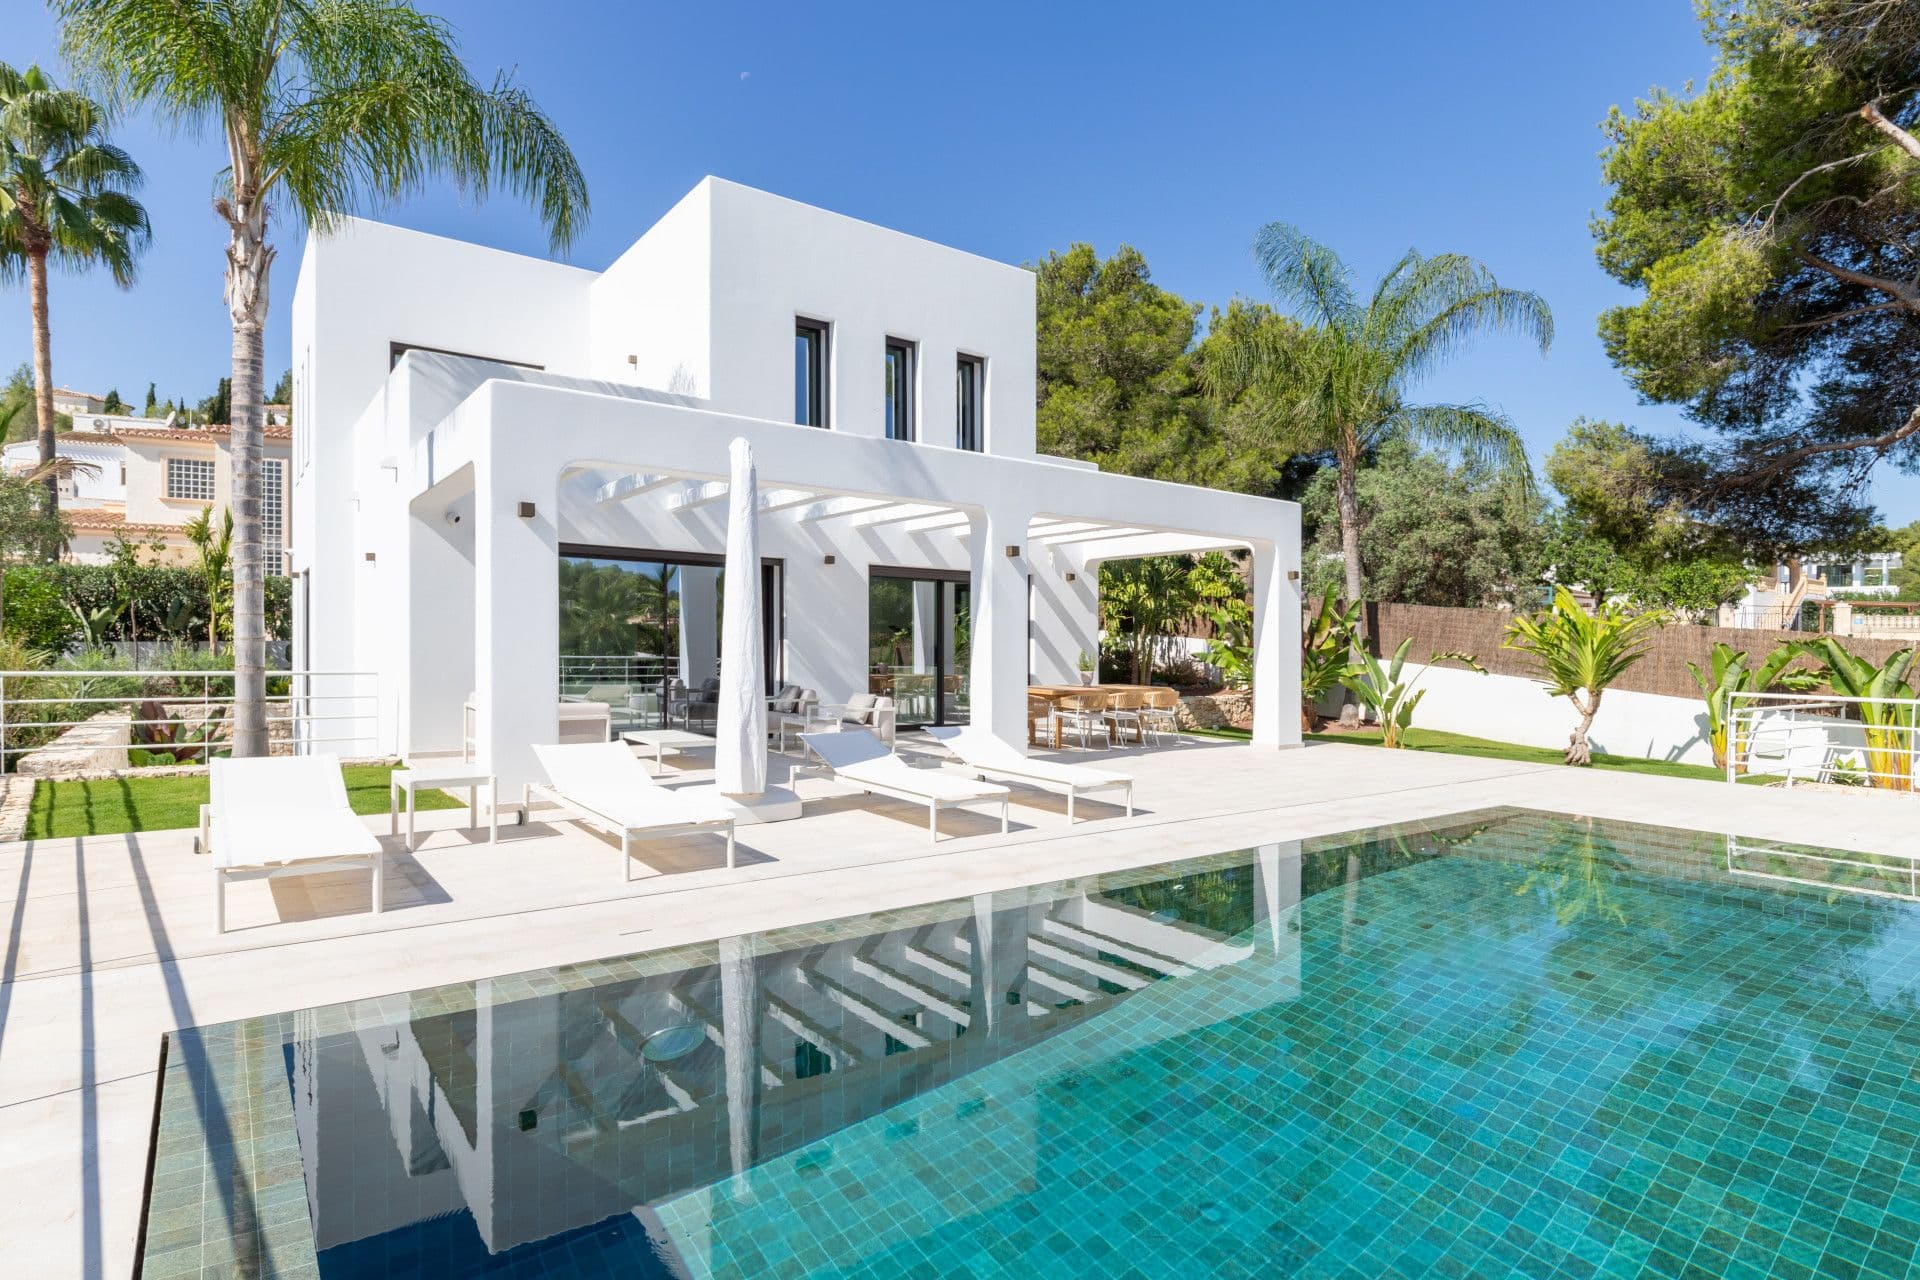 Spectacular modern style villa located in the area of Covatelles, Javea.